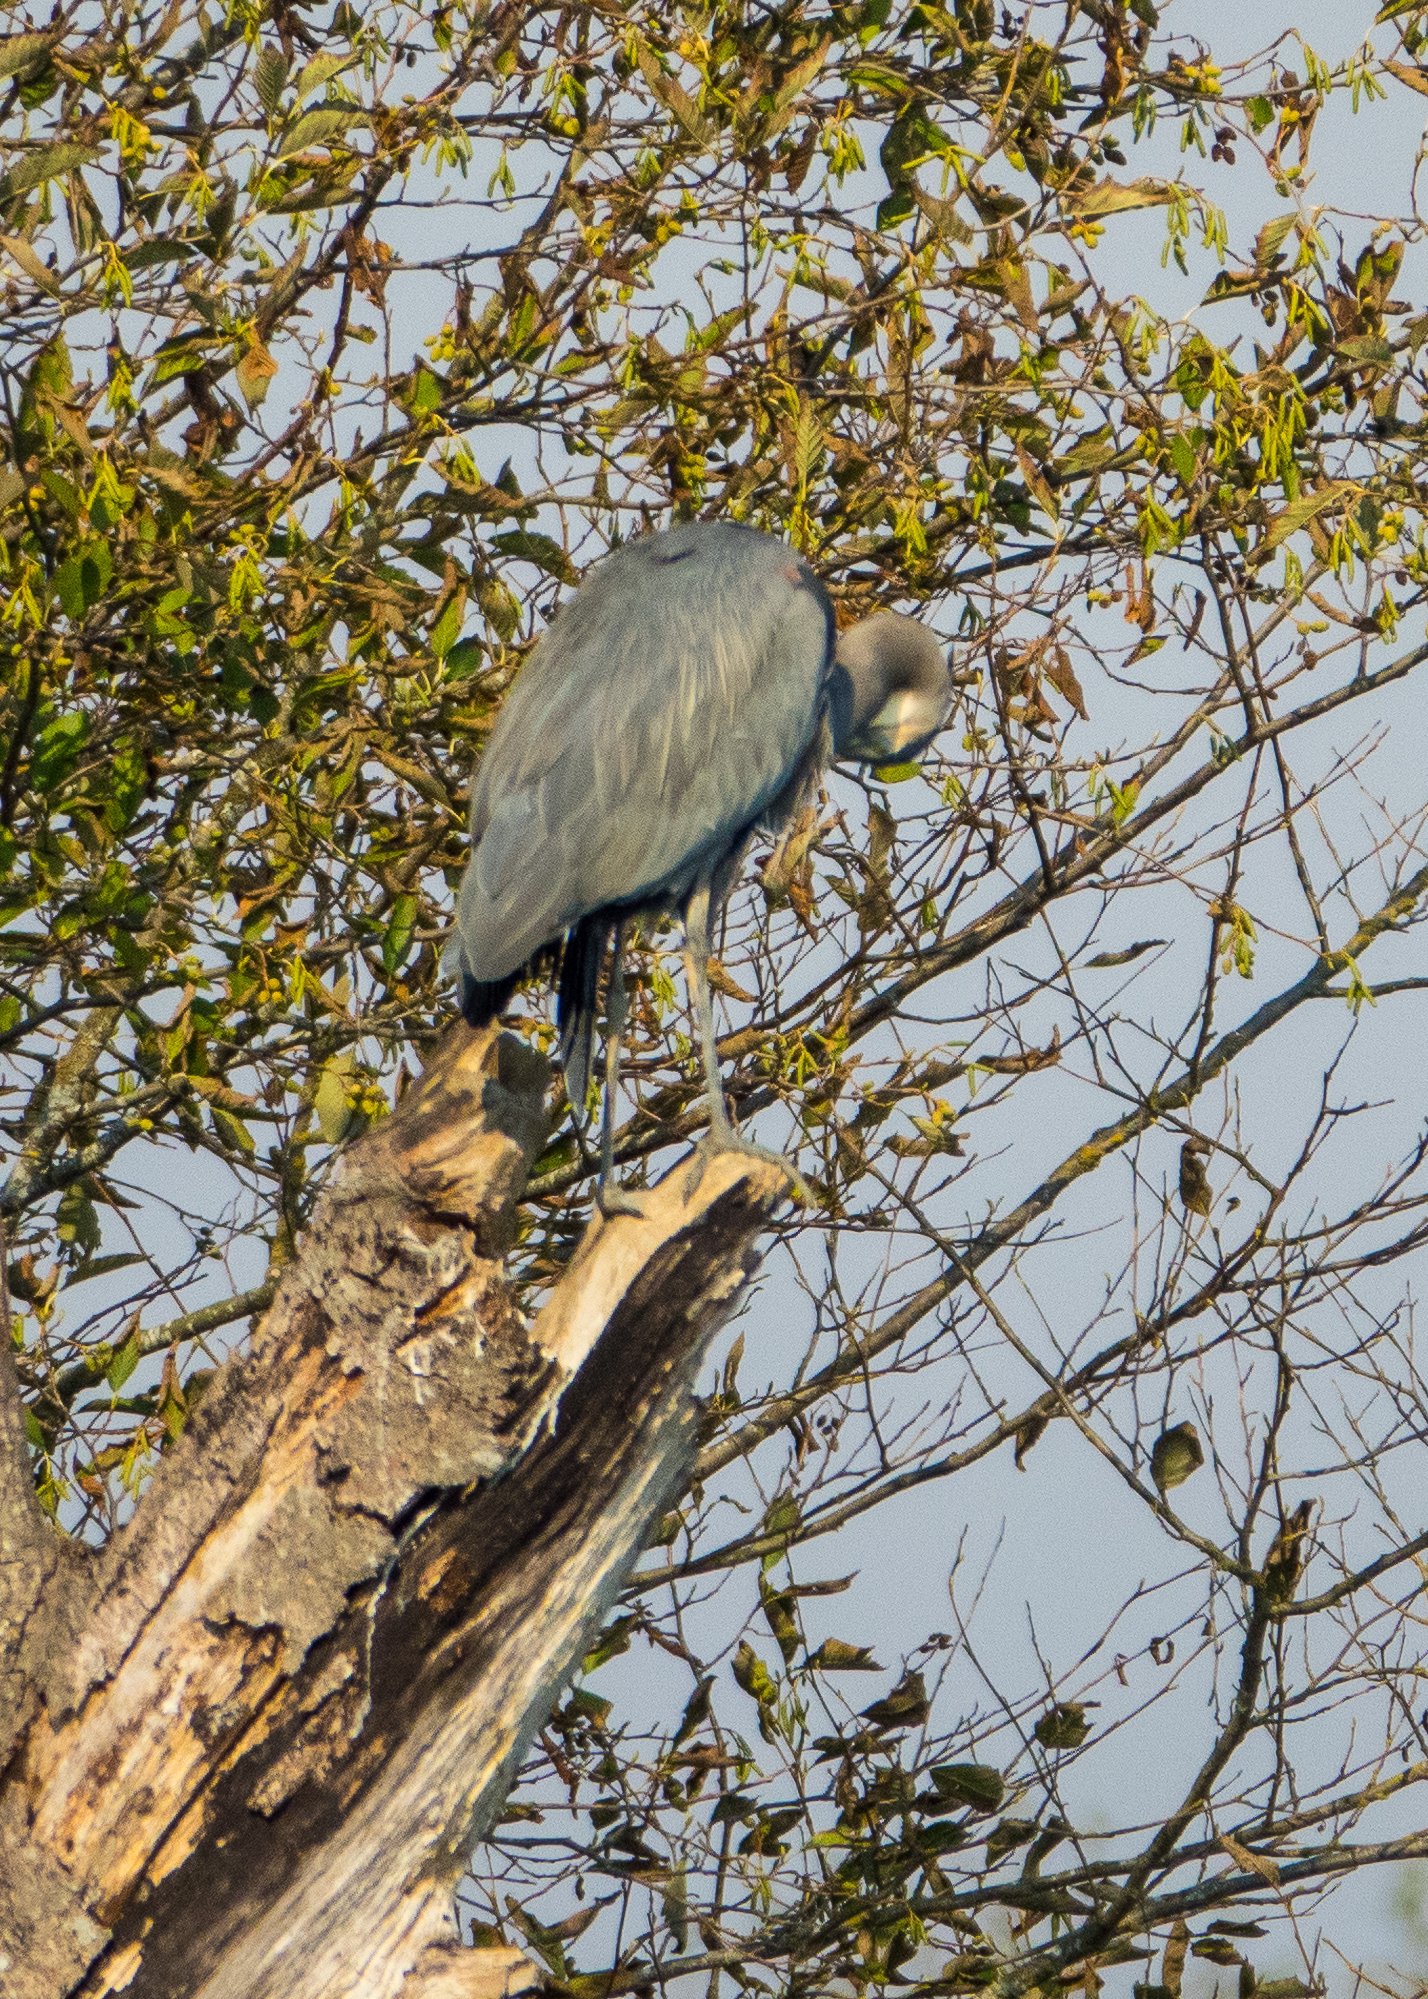  There were a crazy number of blue herons on the large pond near the entrance. 